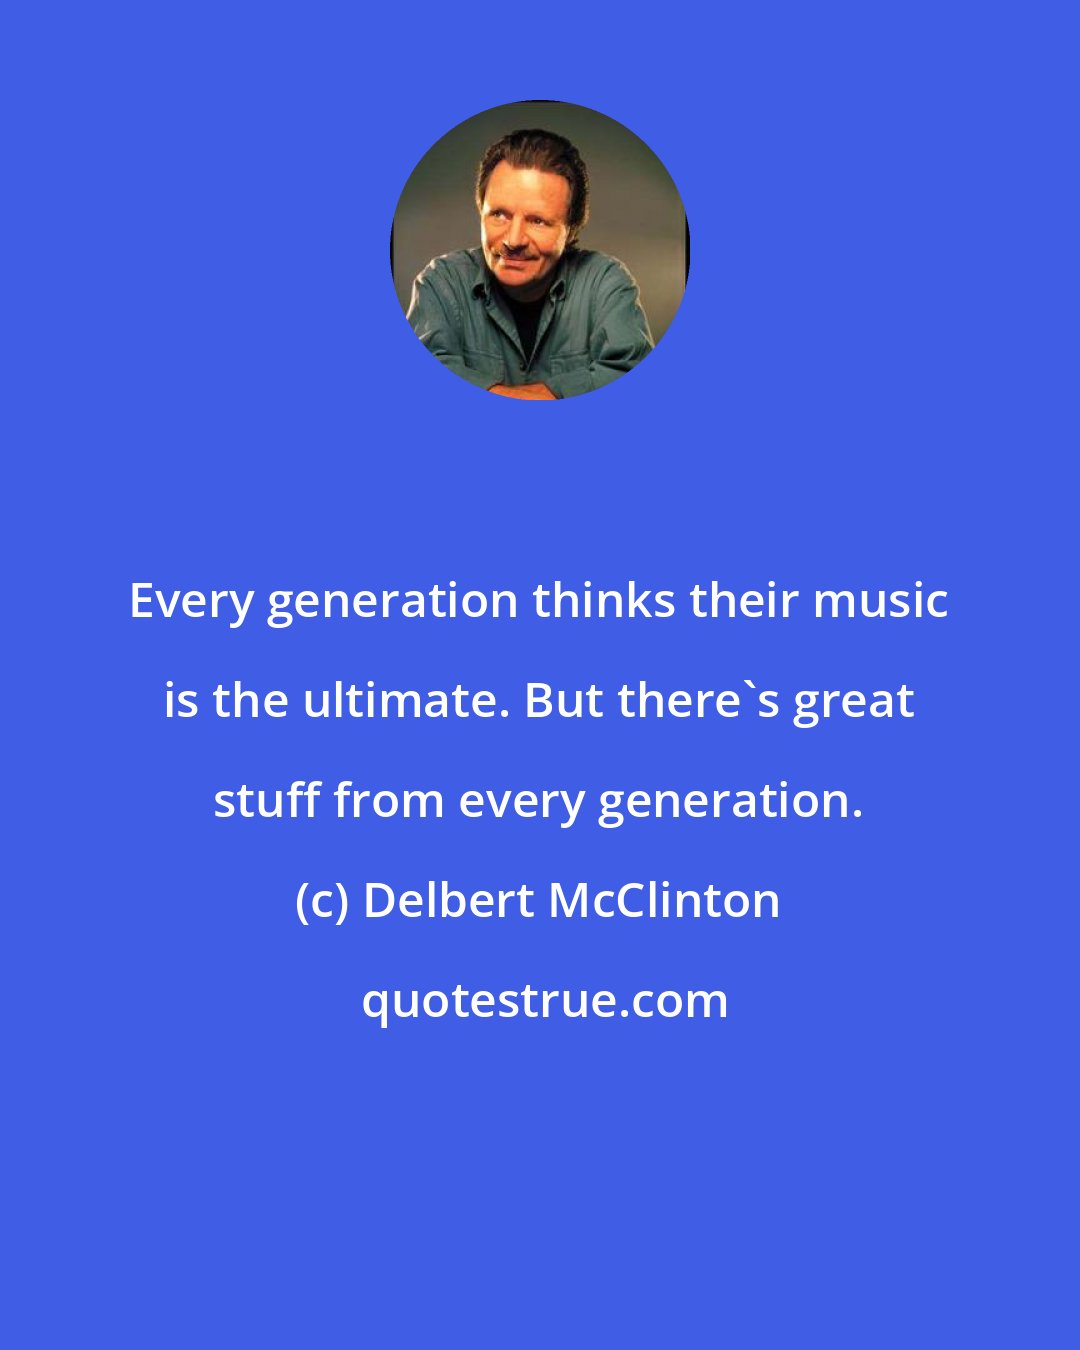 Delbert McClinton: Every generation thinks their music is the ultimate. But there's great stuff from every generation.